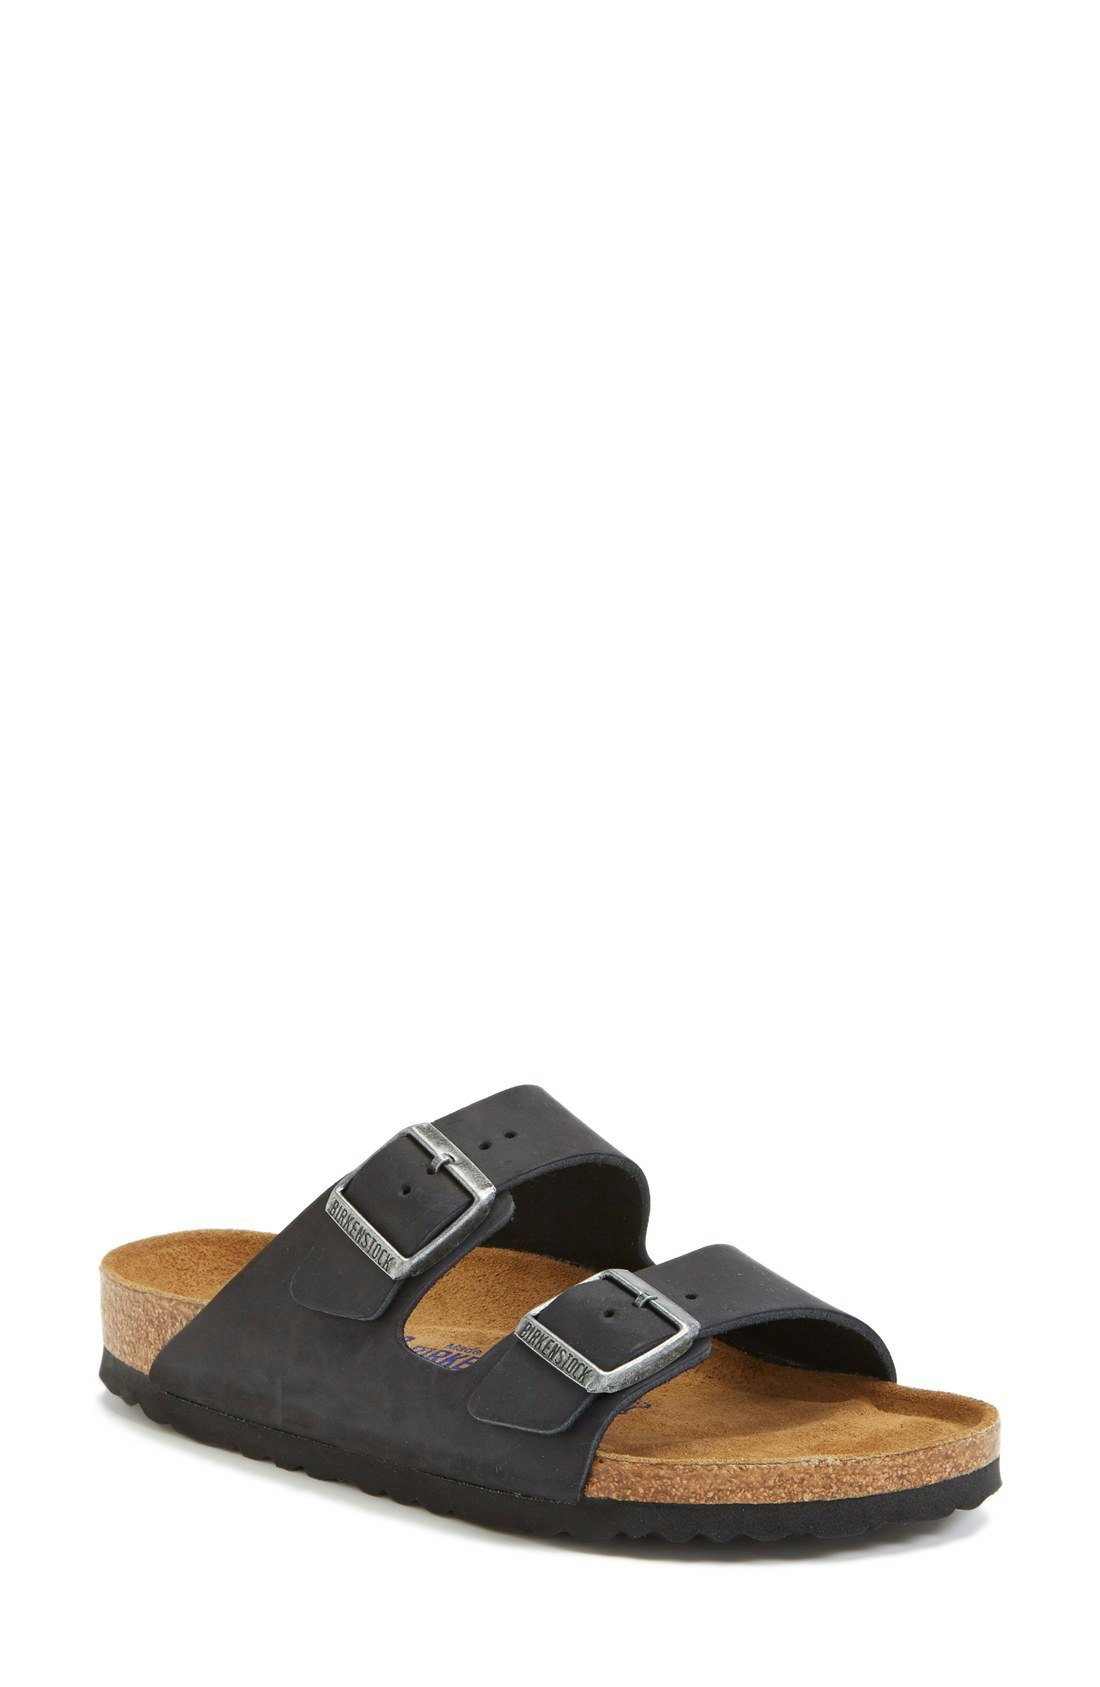 clean leather sandal footbed